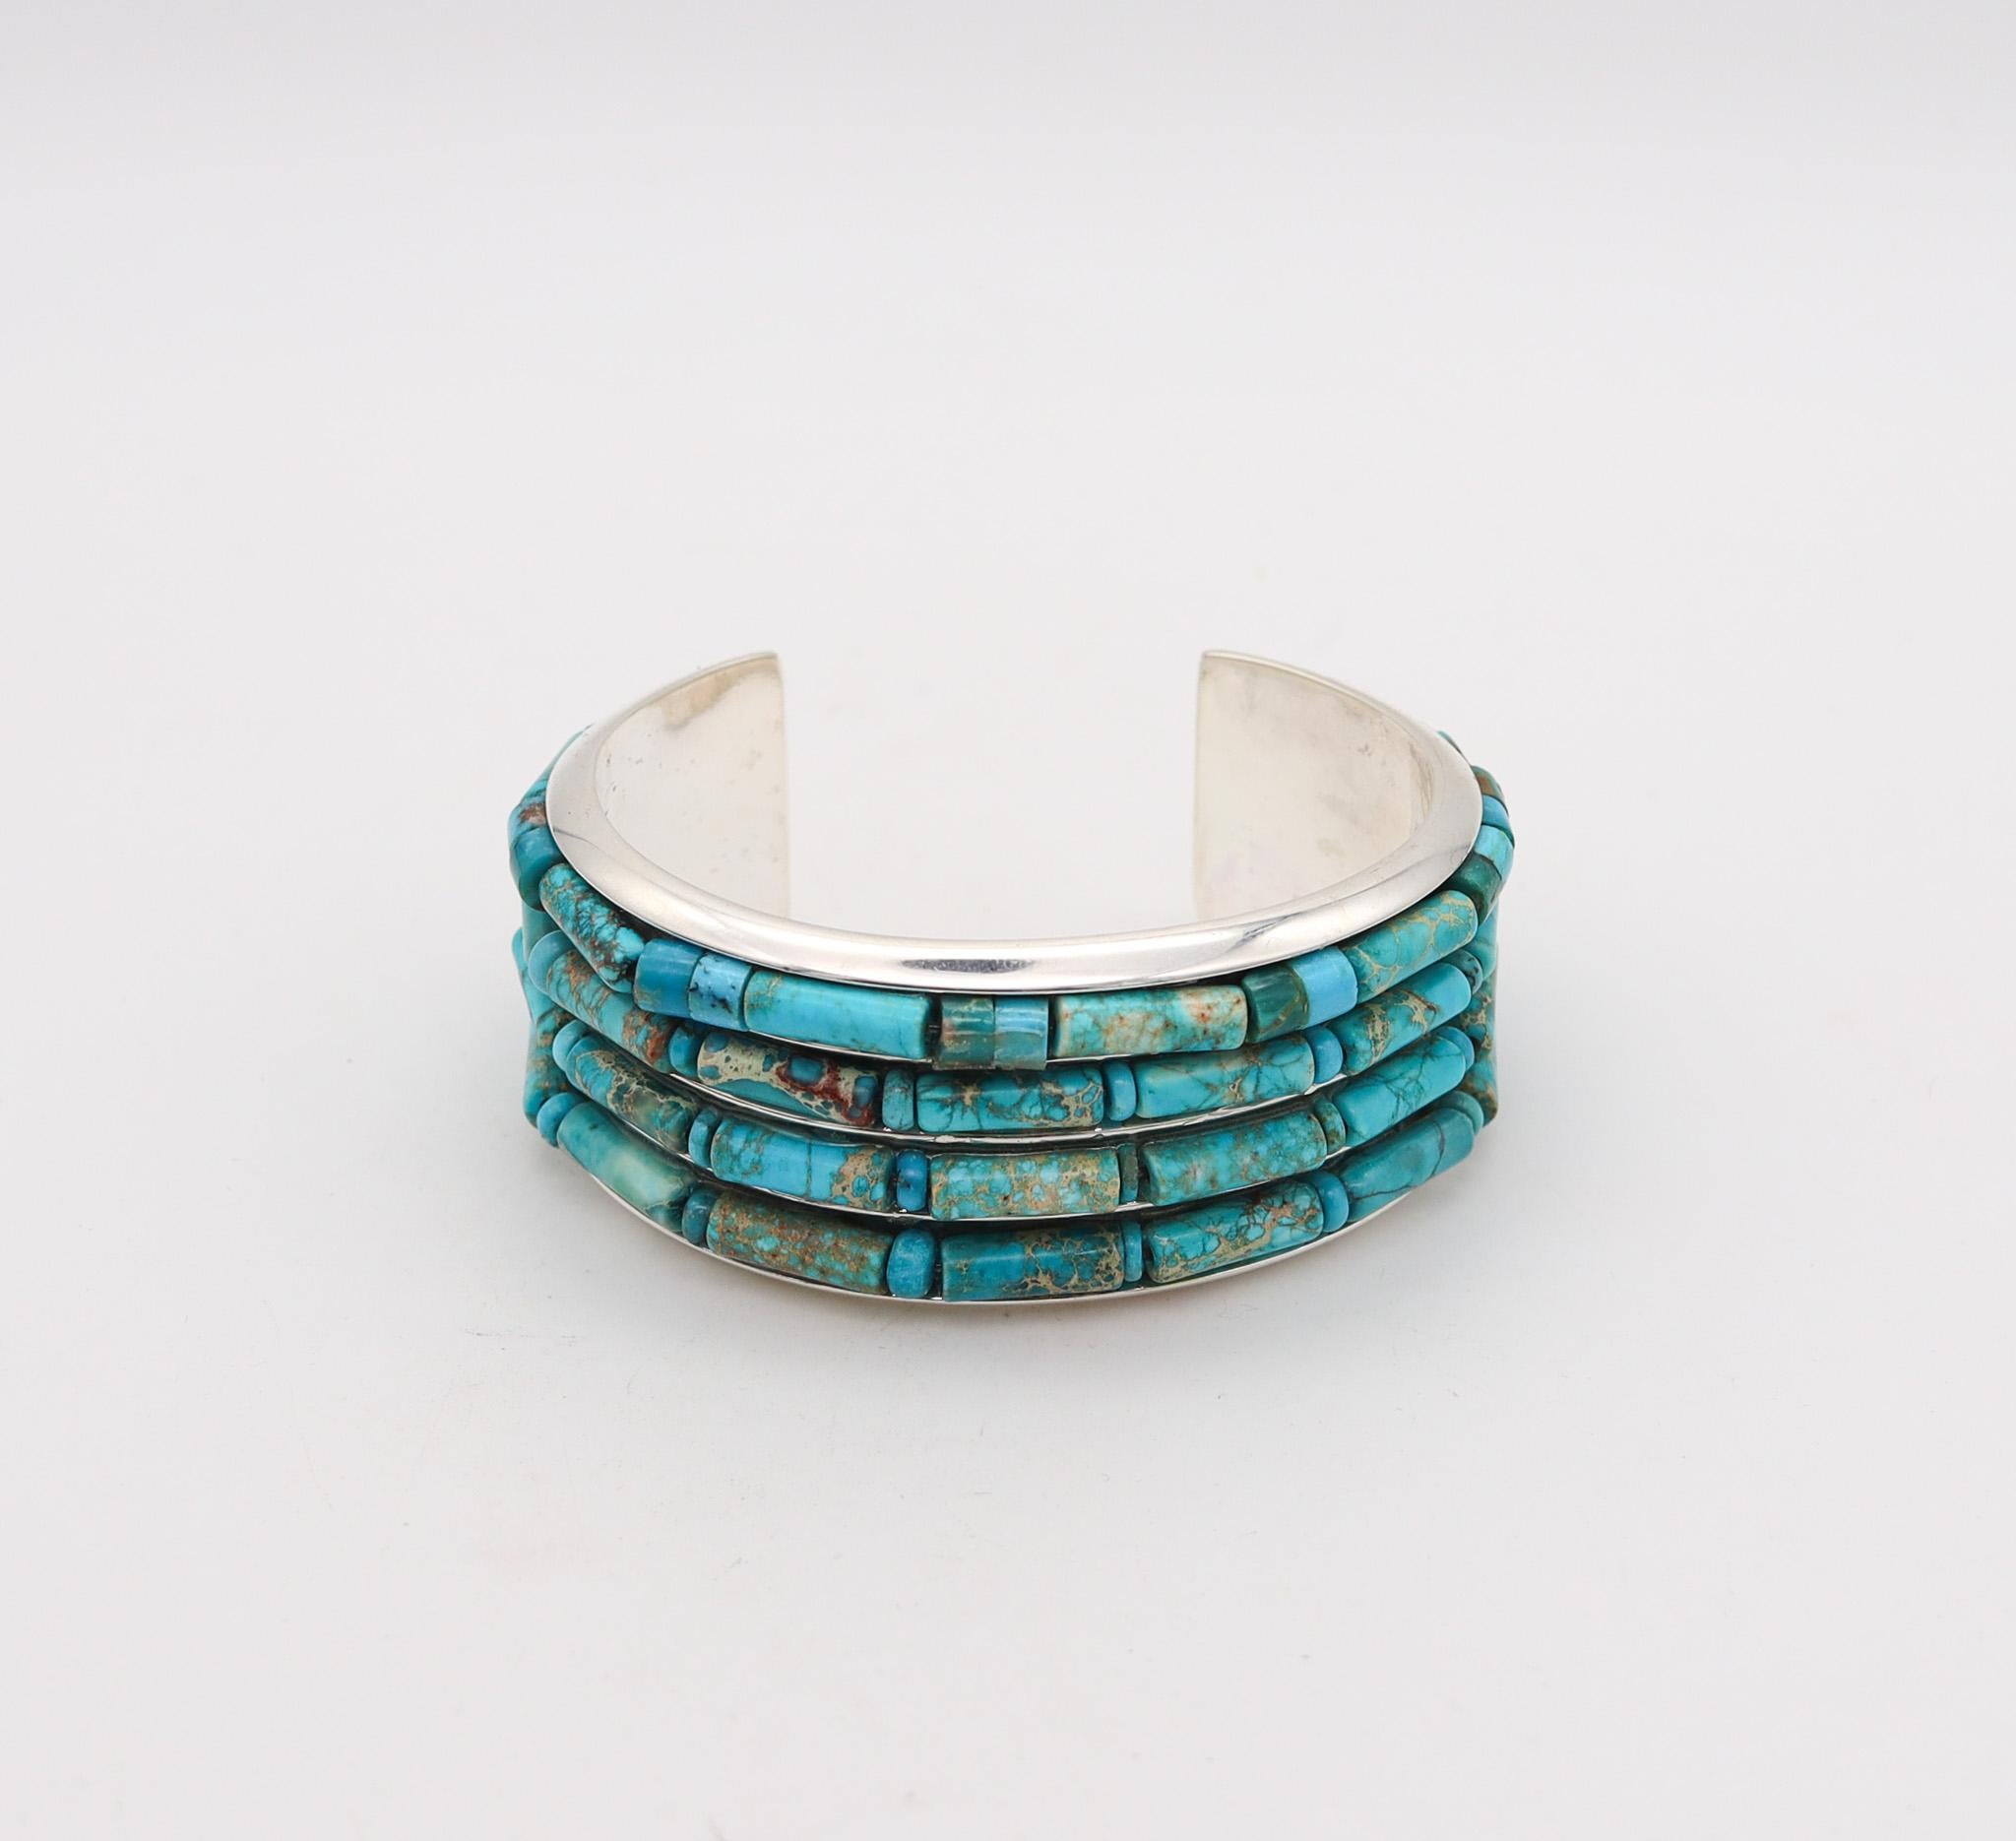 Cabochon Native American 1970 Cuff Bracelet In .925 Sterling Silver With Blue Turquoises